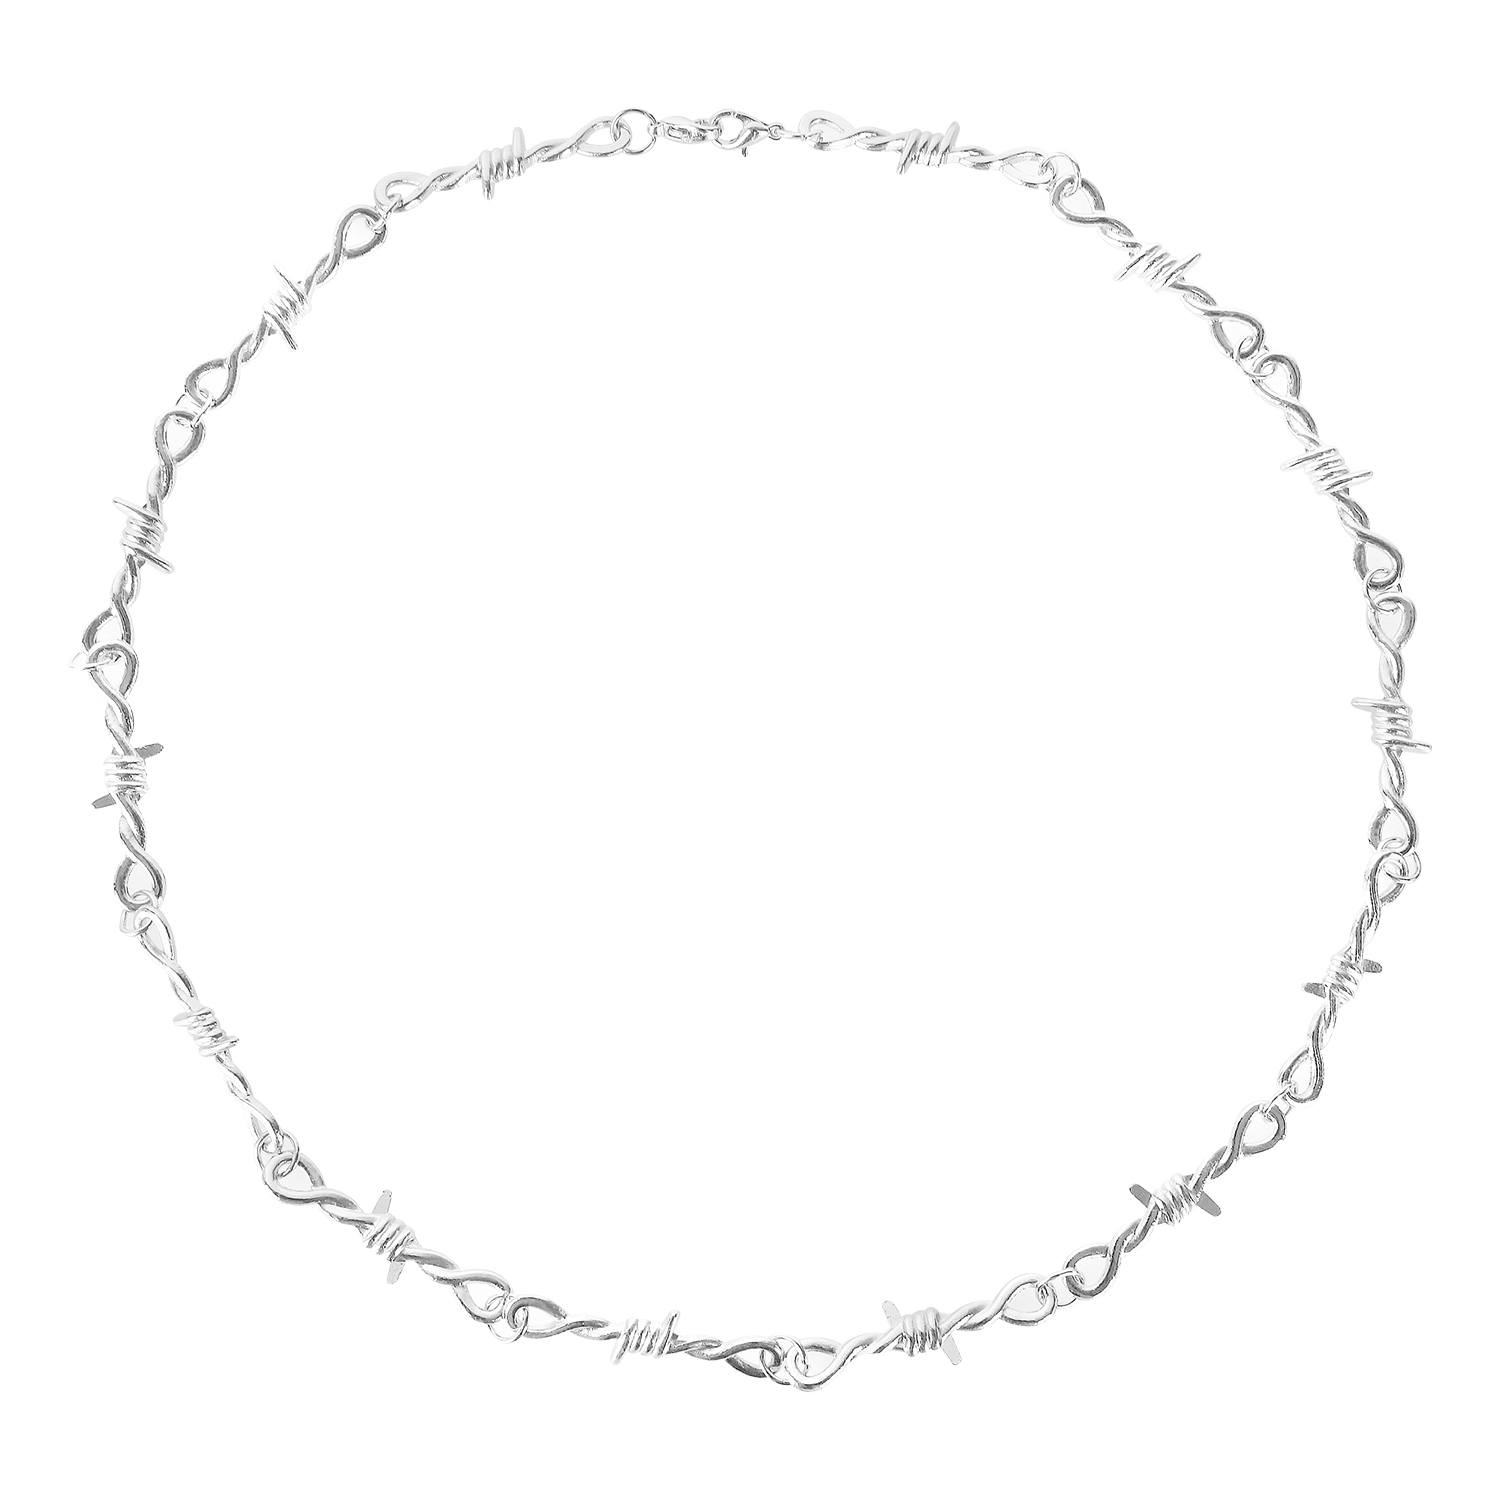 Punk Wire Brambles Iron Unisex Choker Necklace Women Hip-hop Gothic Style Barbed Wire Little Thorns Chain Choker